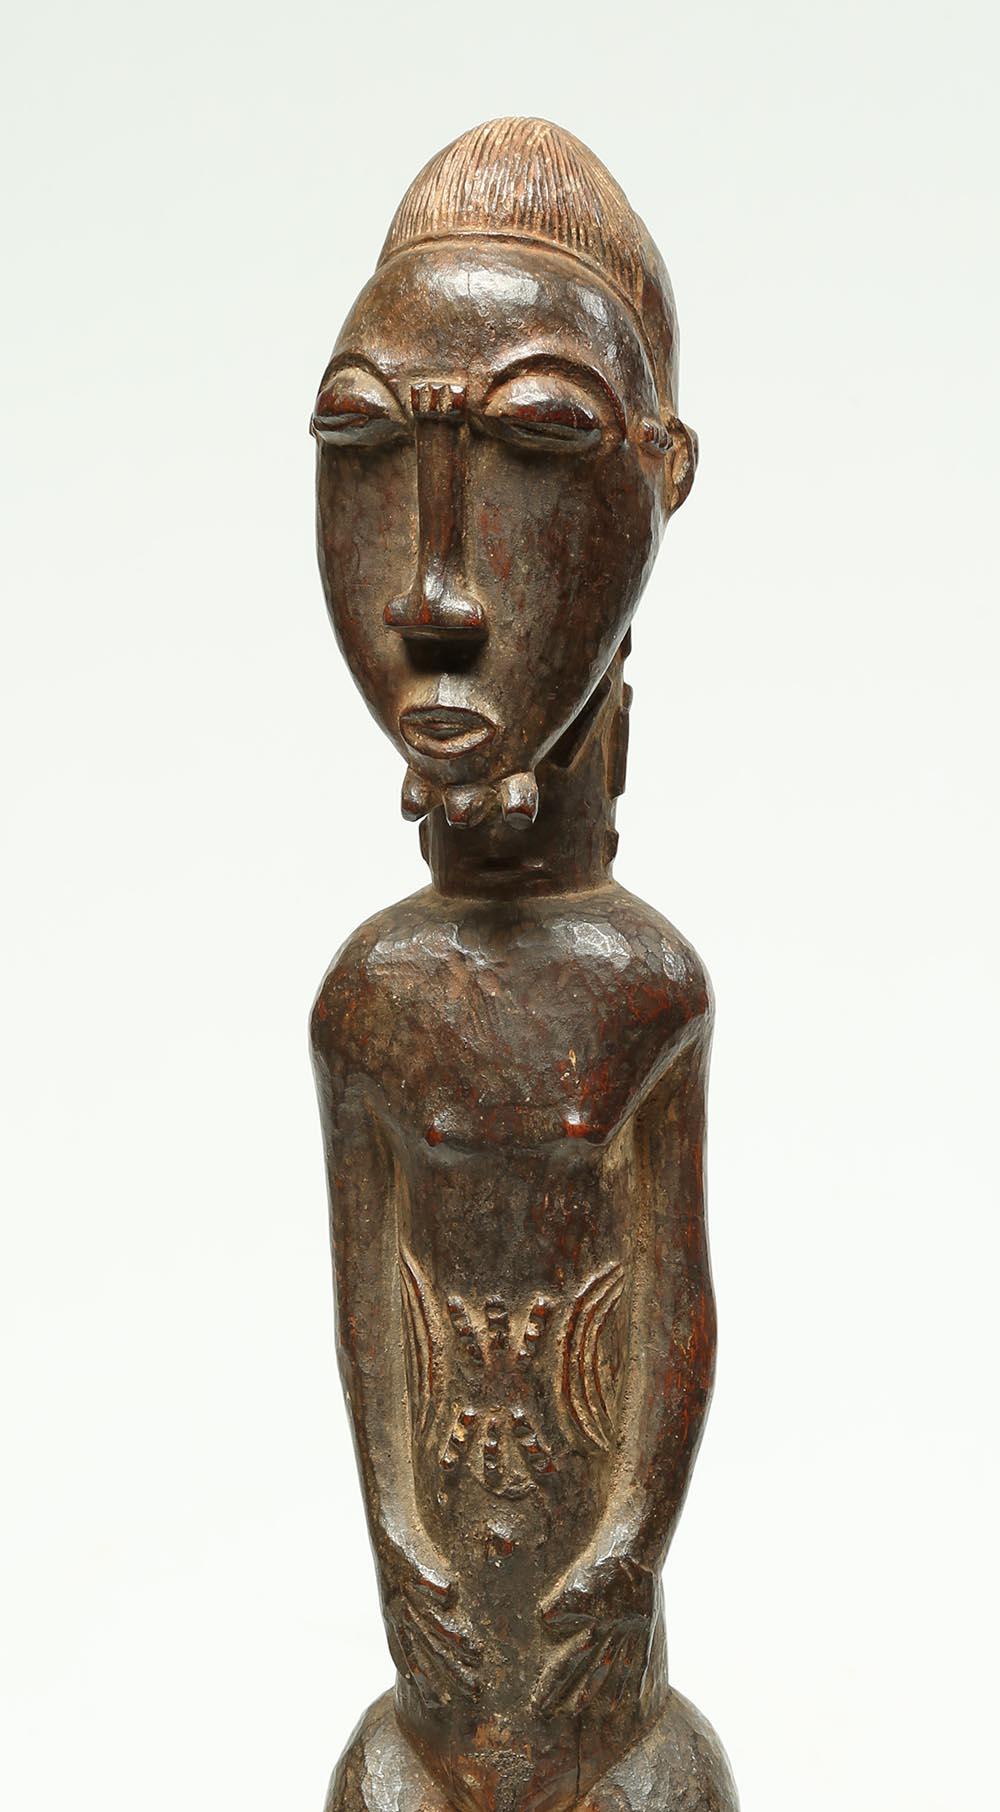 Wood Tribal Baule standing male figure, important provenance

Early Baule standing male figure with hands on stomach, three pronged beard, finely carved hair style. Elaborate carved raised scarification marks on body. Old stabile crack in base and